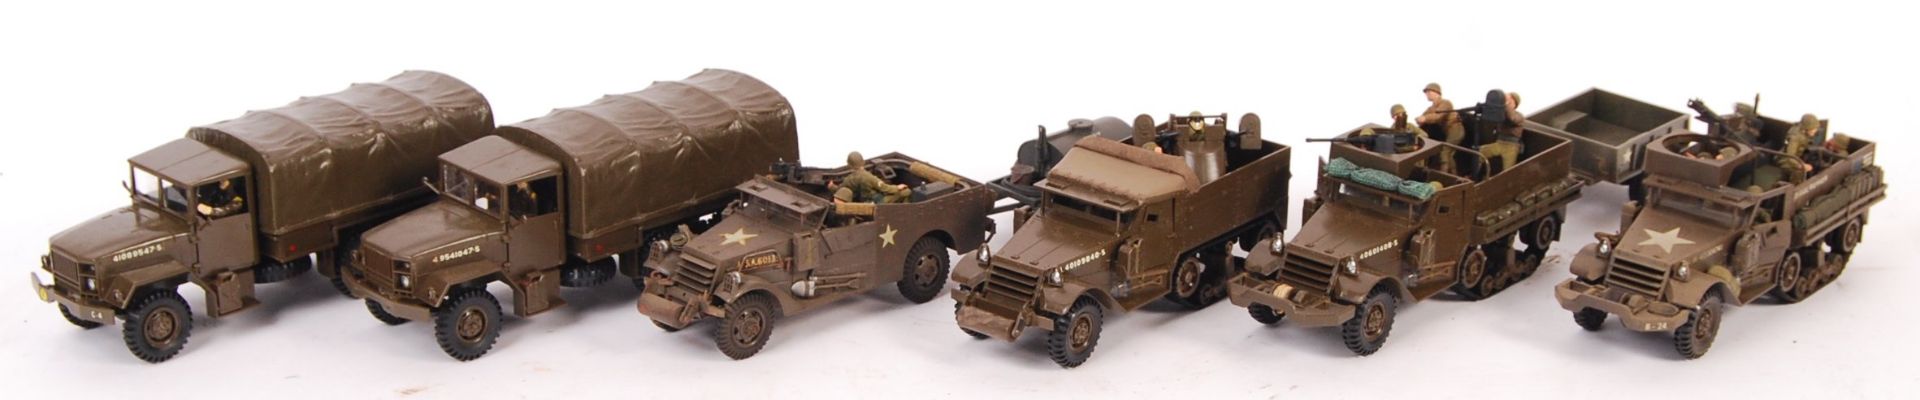 COLLECTION OF ASSORTED MONOGRAM MILITARY 1/35 SCALE TRUCKS